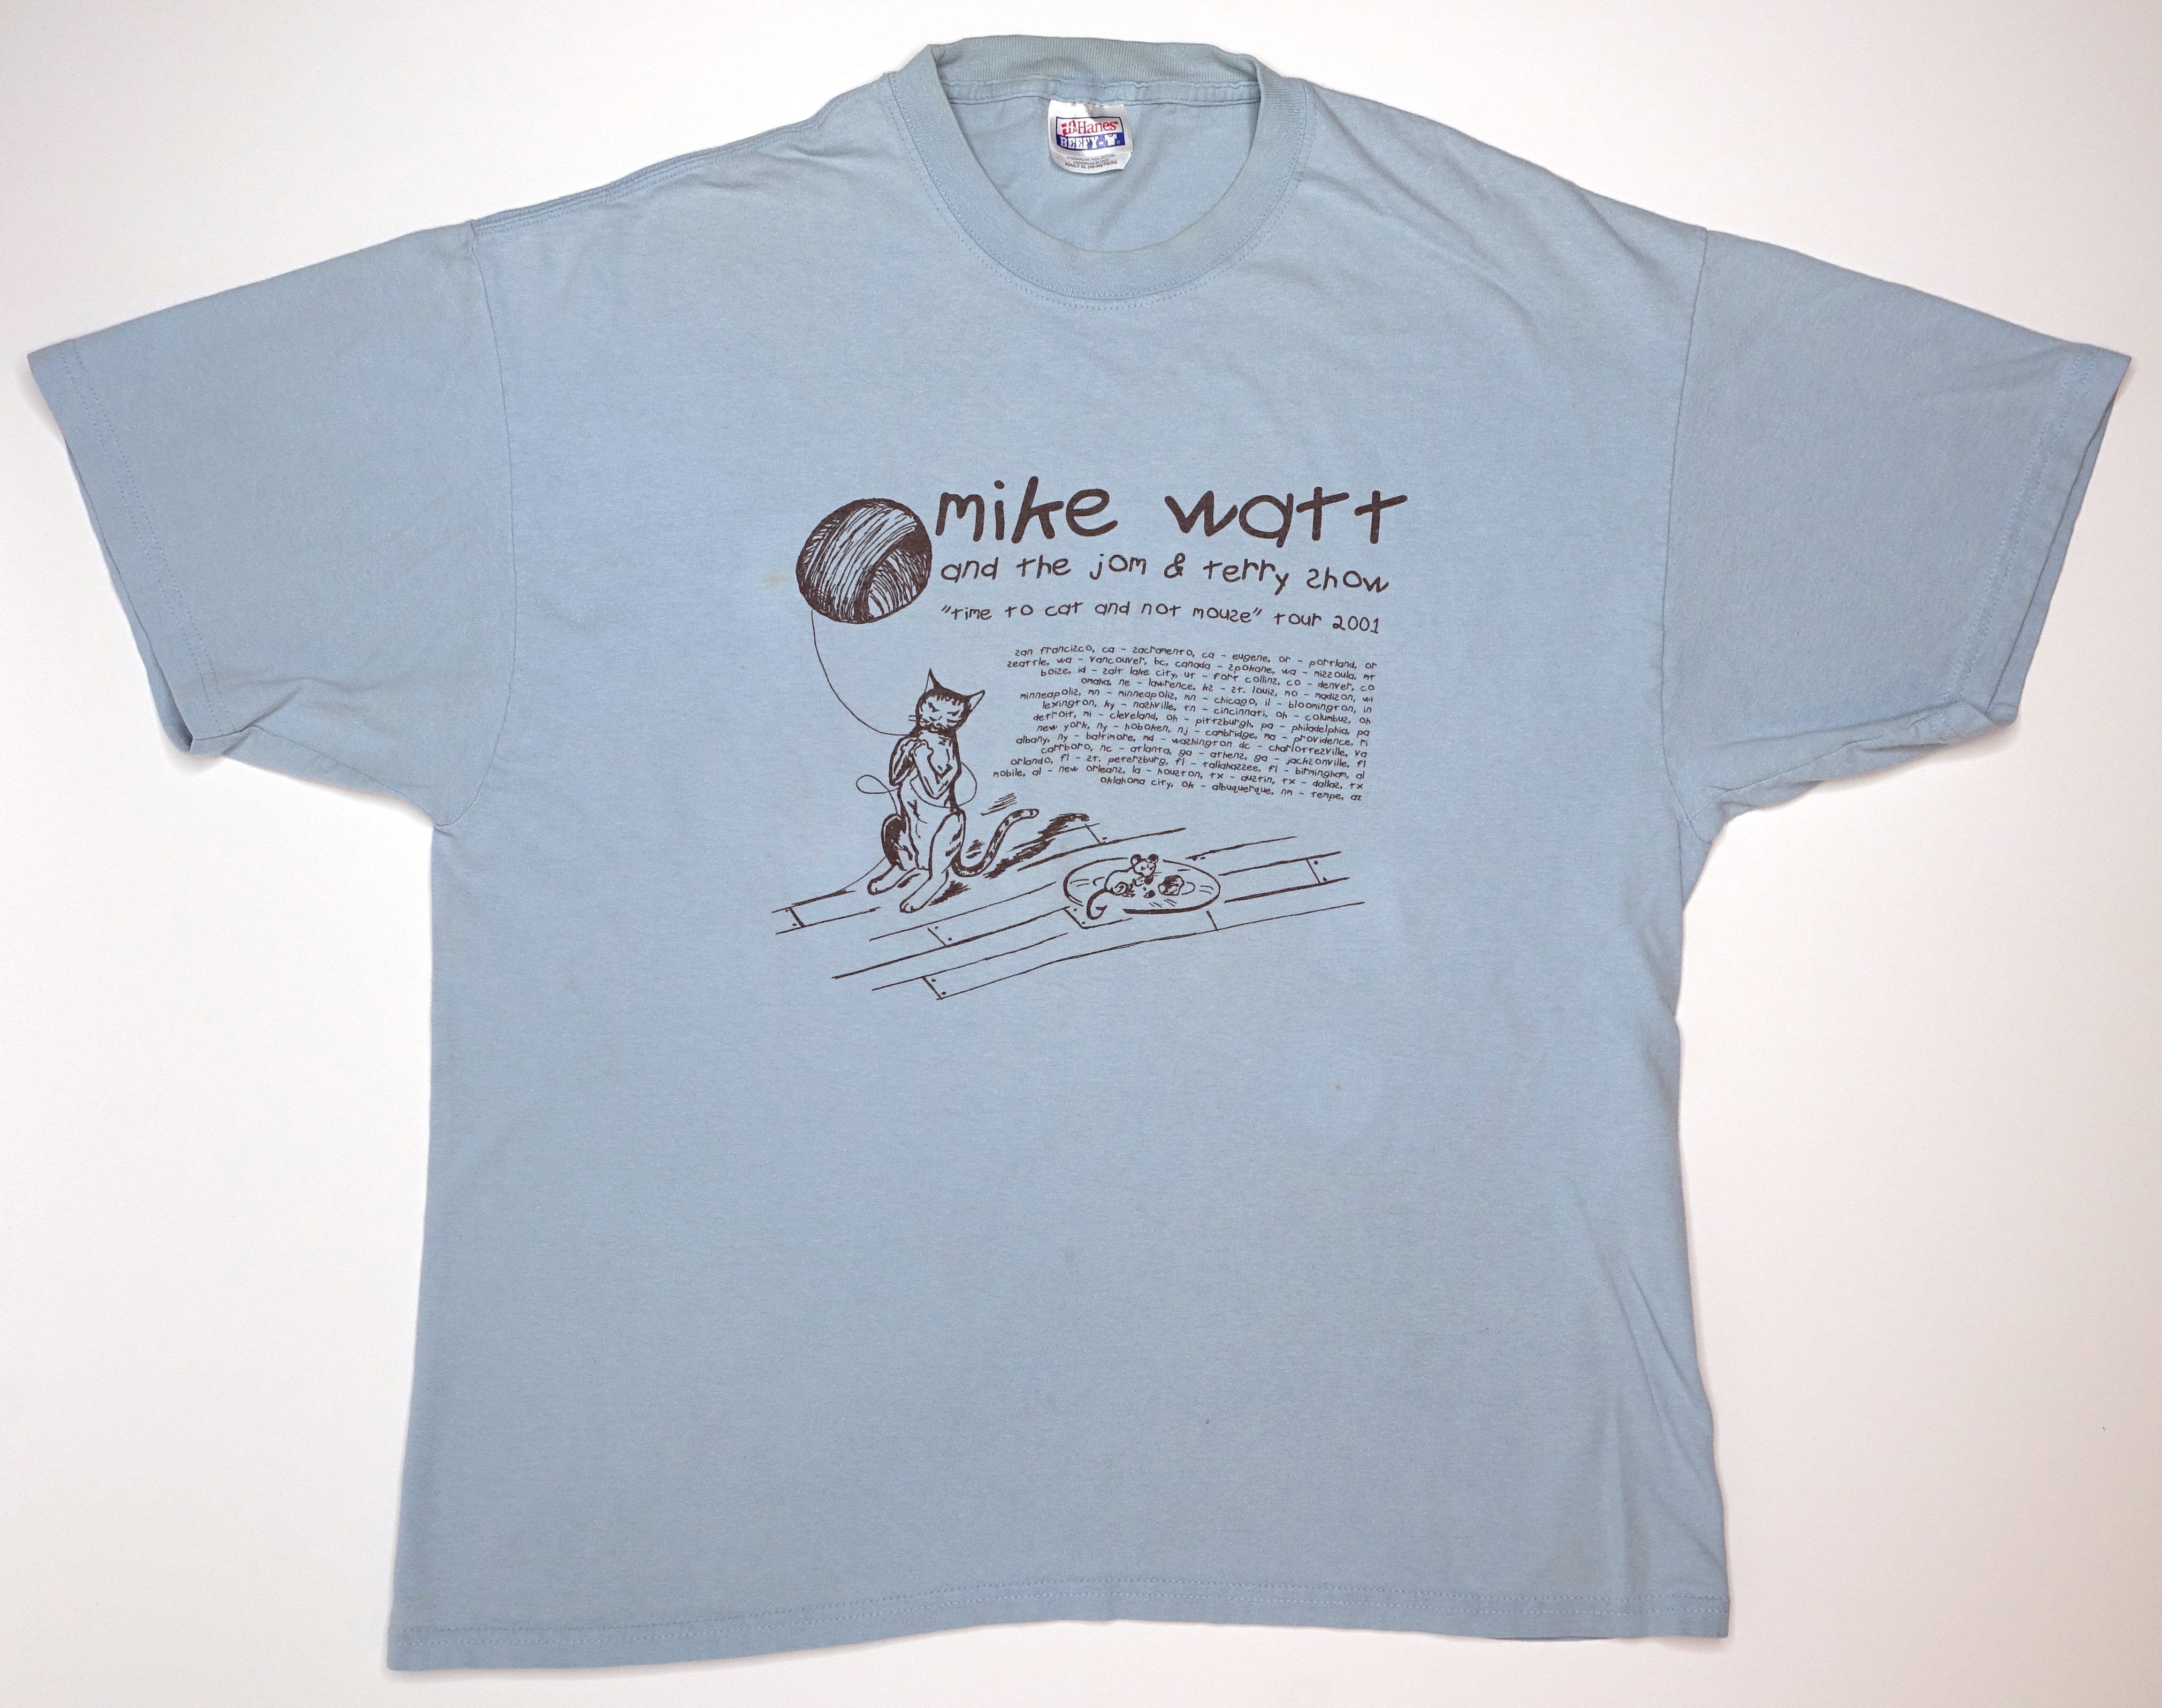 Mike Watt - Time To Cat And Not Mouse 2001 Tour Shirt Size XL